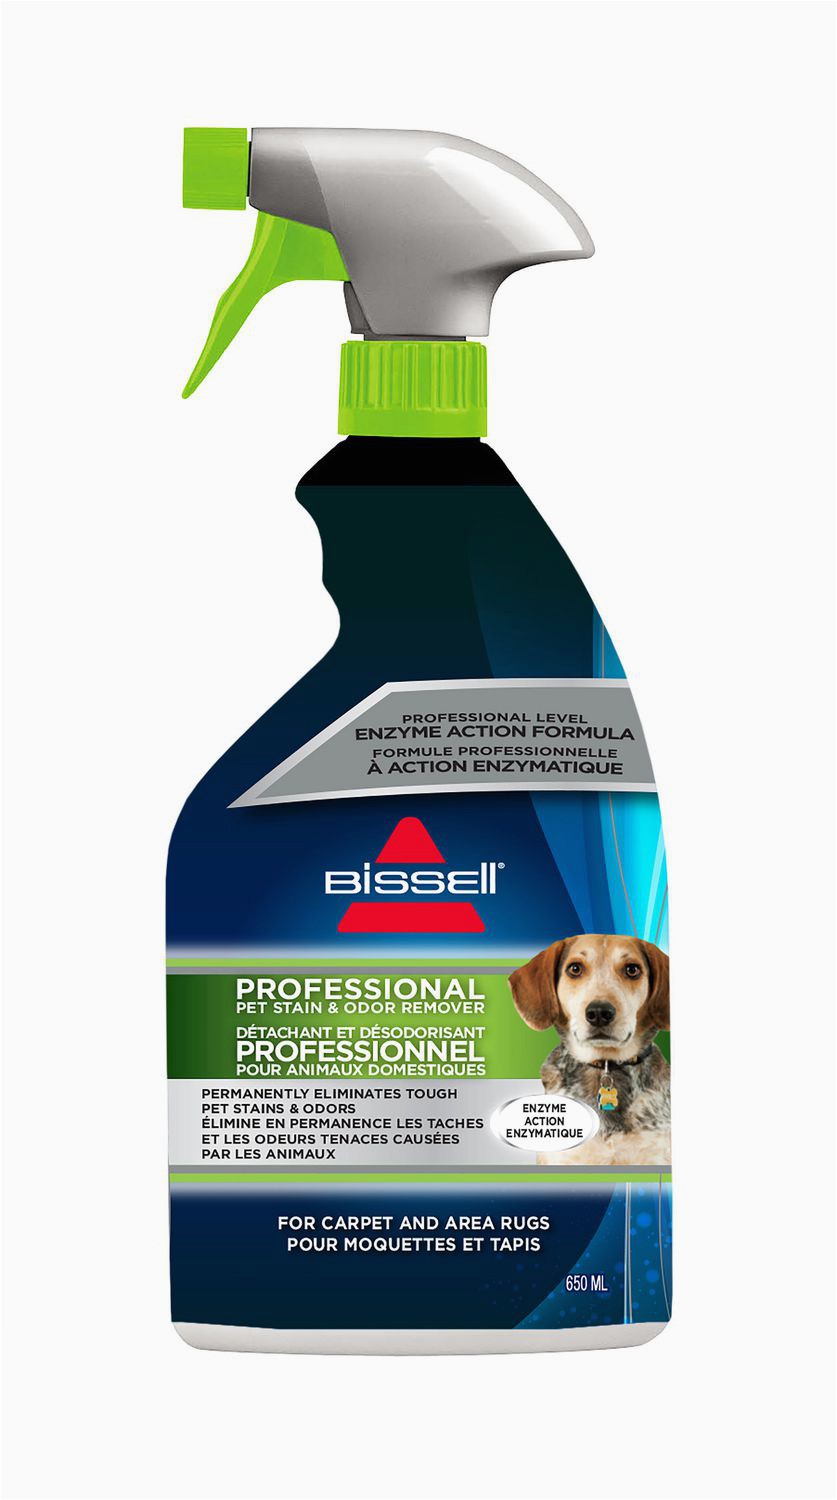 Bissell Pro Carpet and area Rug Stain Remover Bissell Professional Enzyme Action Stain and Odorâ¢ Spray formula